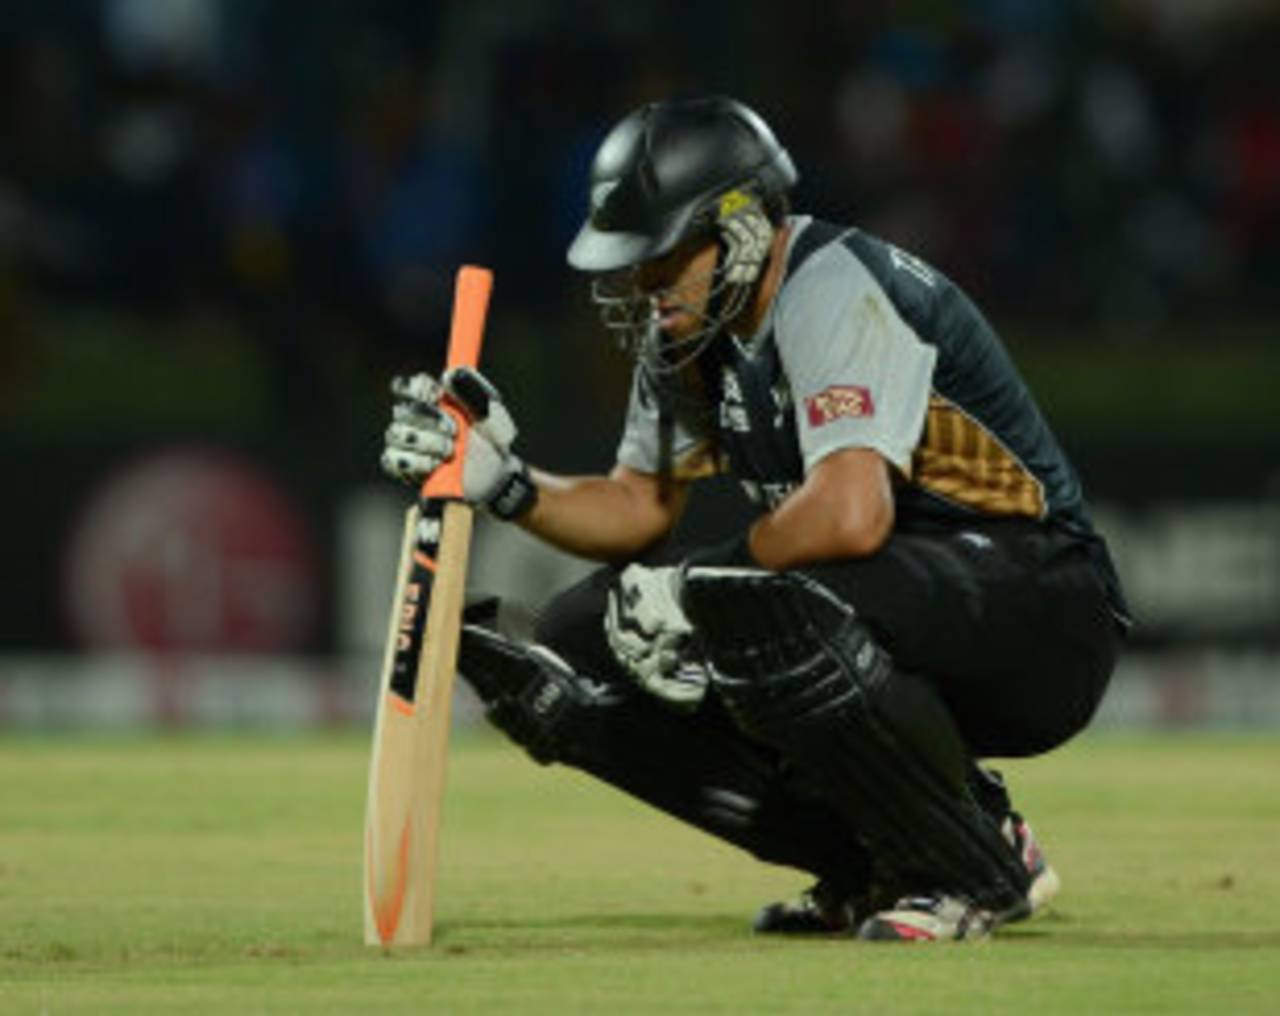 It was Super Over heartbreak again for Ross Taylor and New Zealand&nbsp;&nbsp;&bull;&nbsp;&nbsp;Getty Images